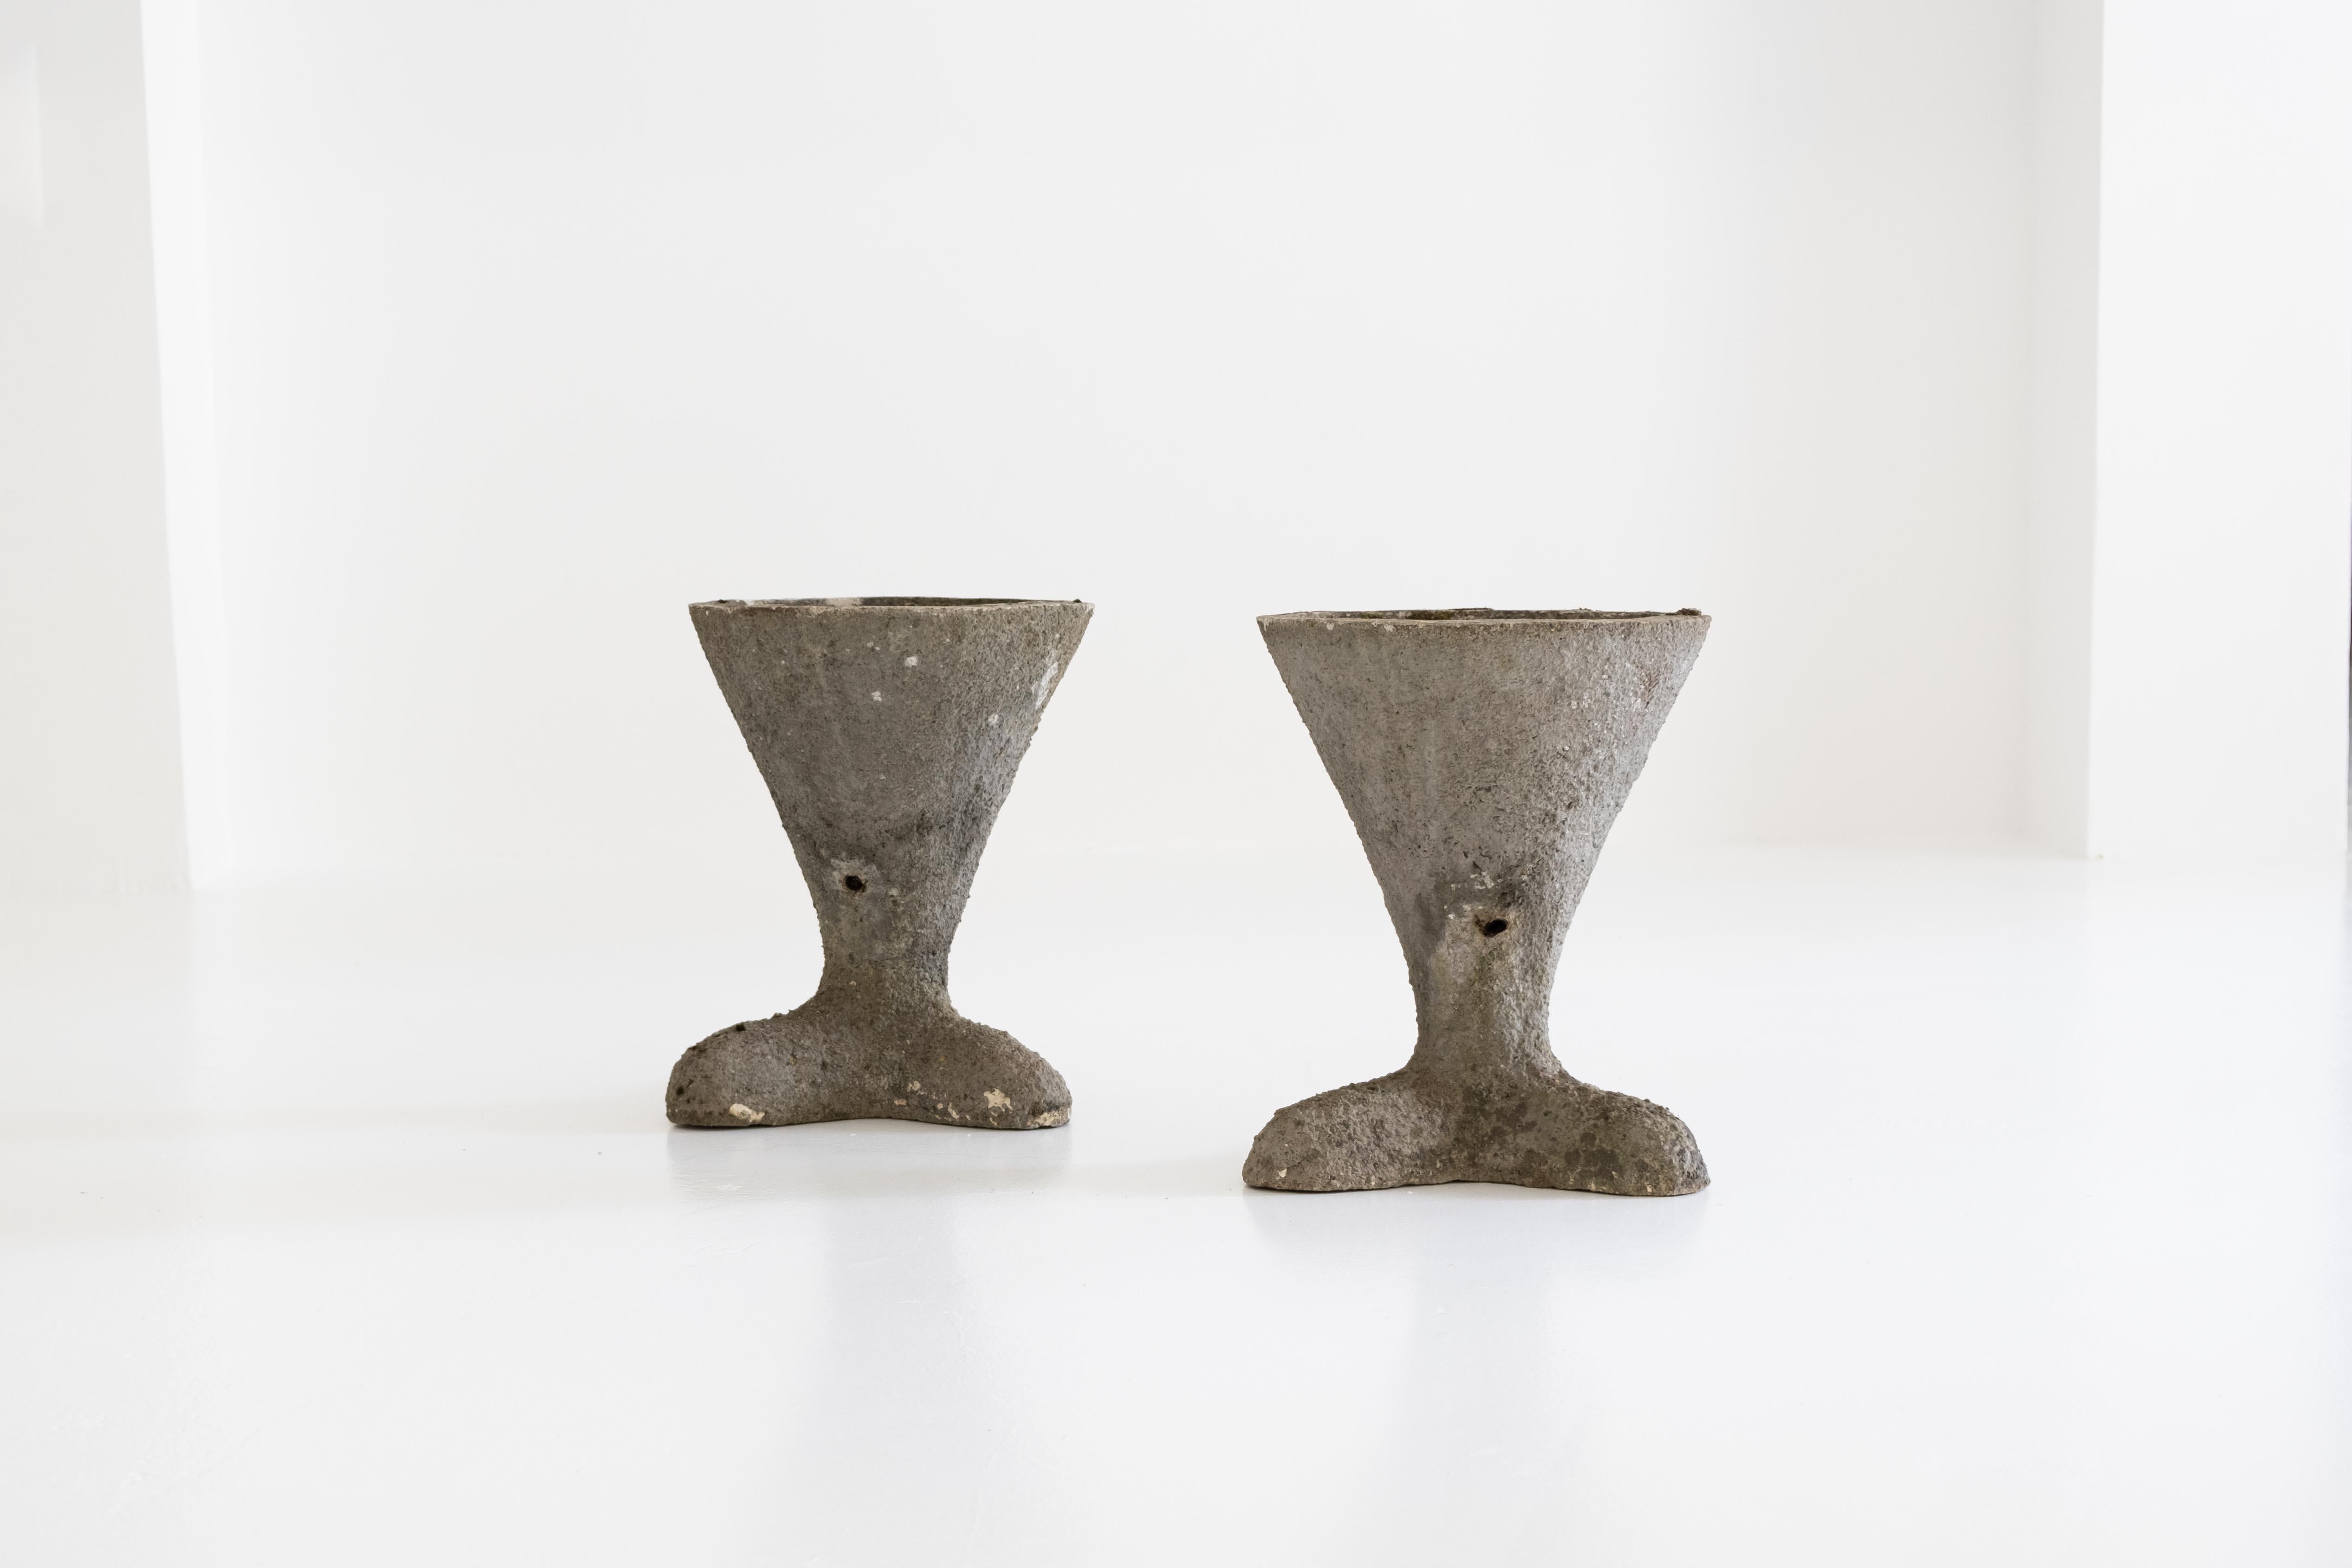 Brutalist Sculptural and Very Decorative Pair of French Concrete Planters, Ca. 1970s